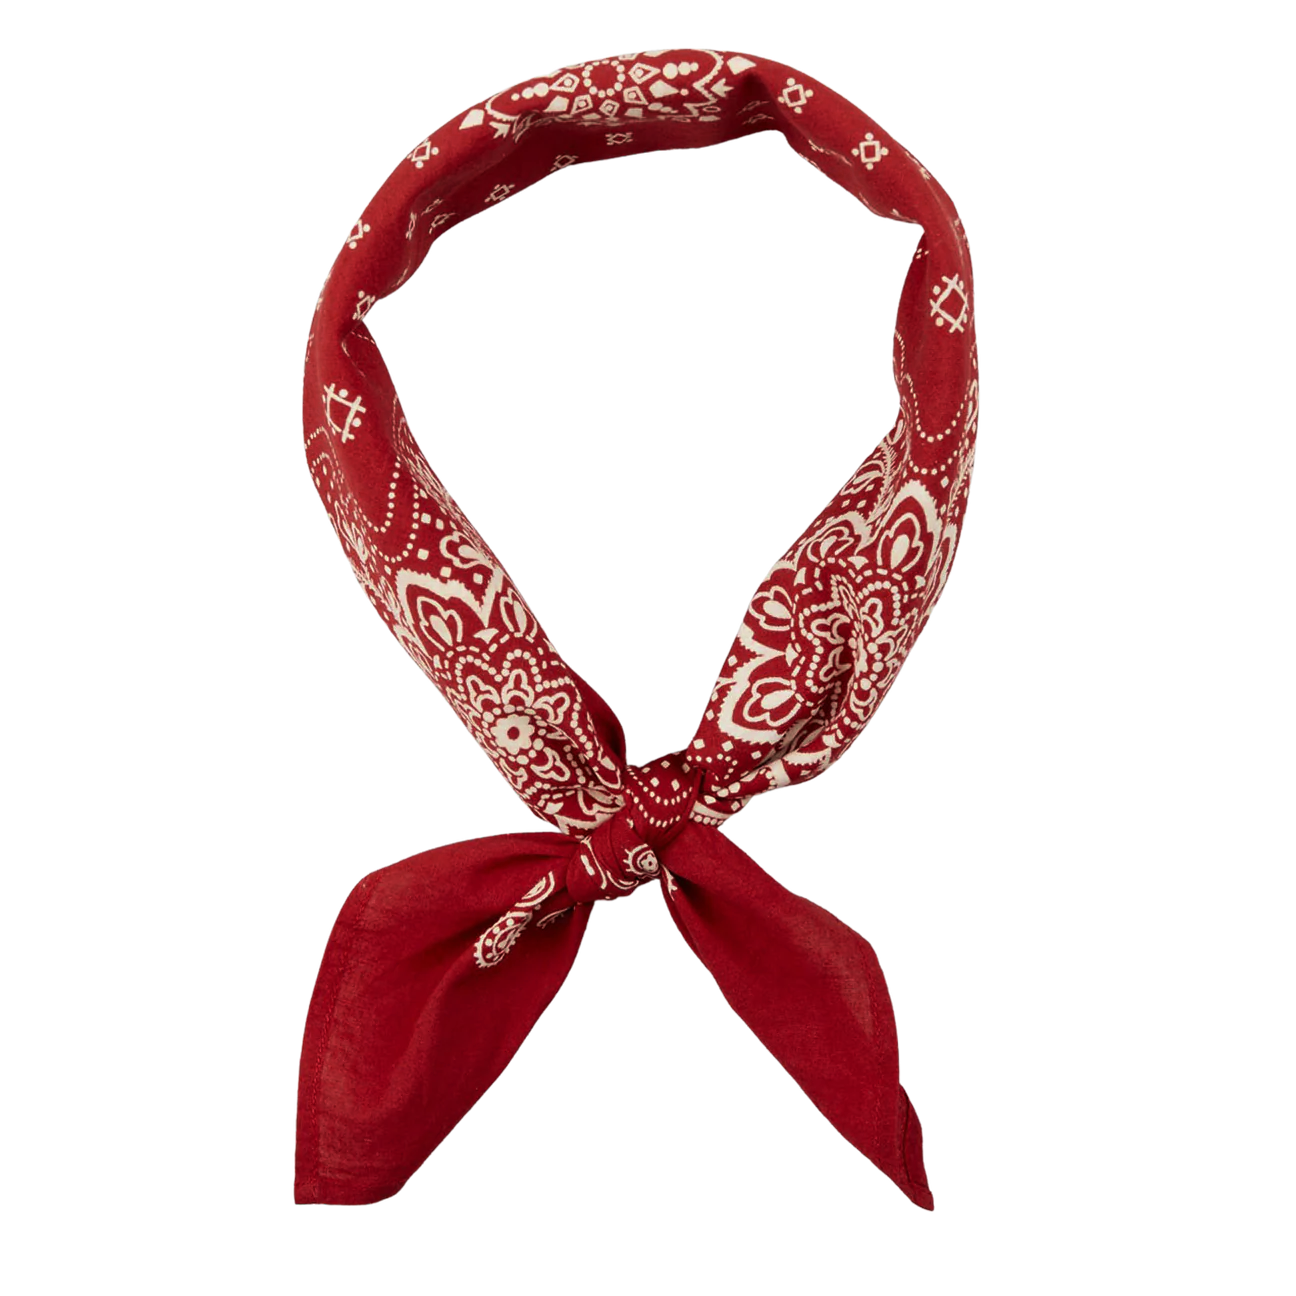 A Universal Works solid red cotton paisley printed bandana tied in a knot against a striped background.